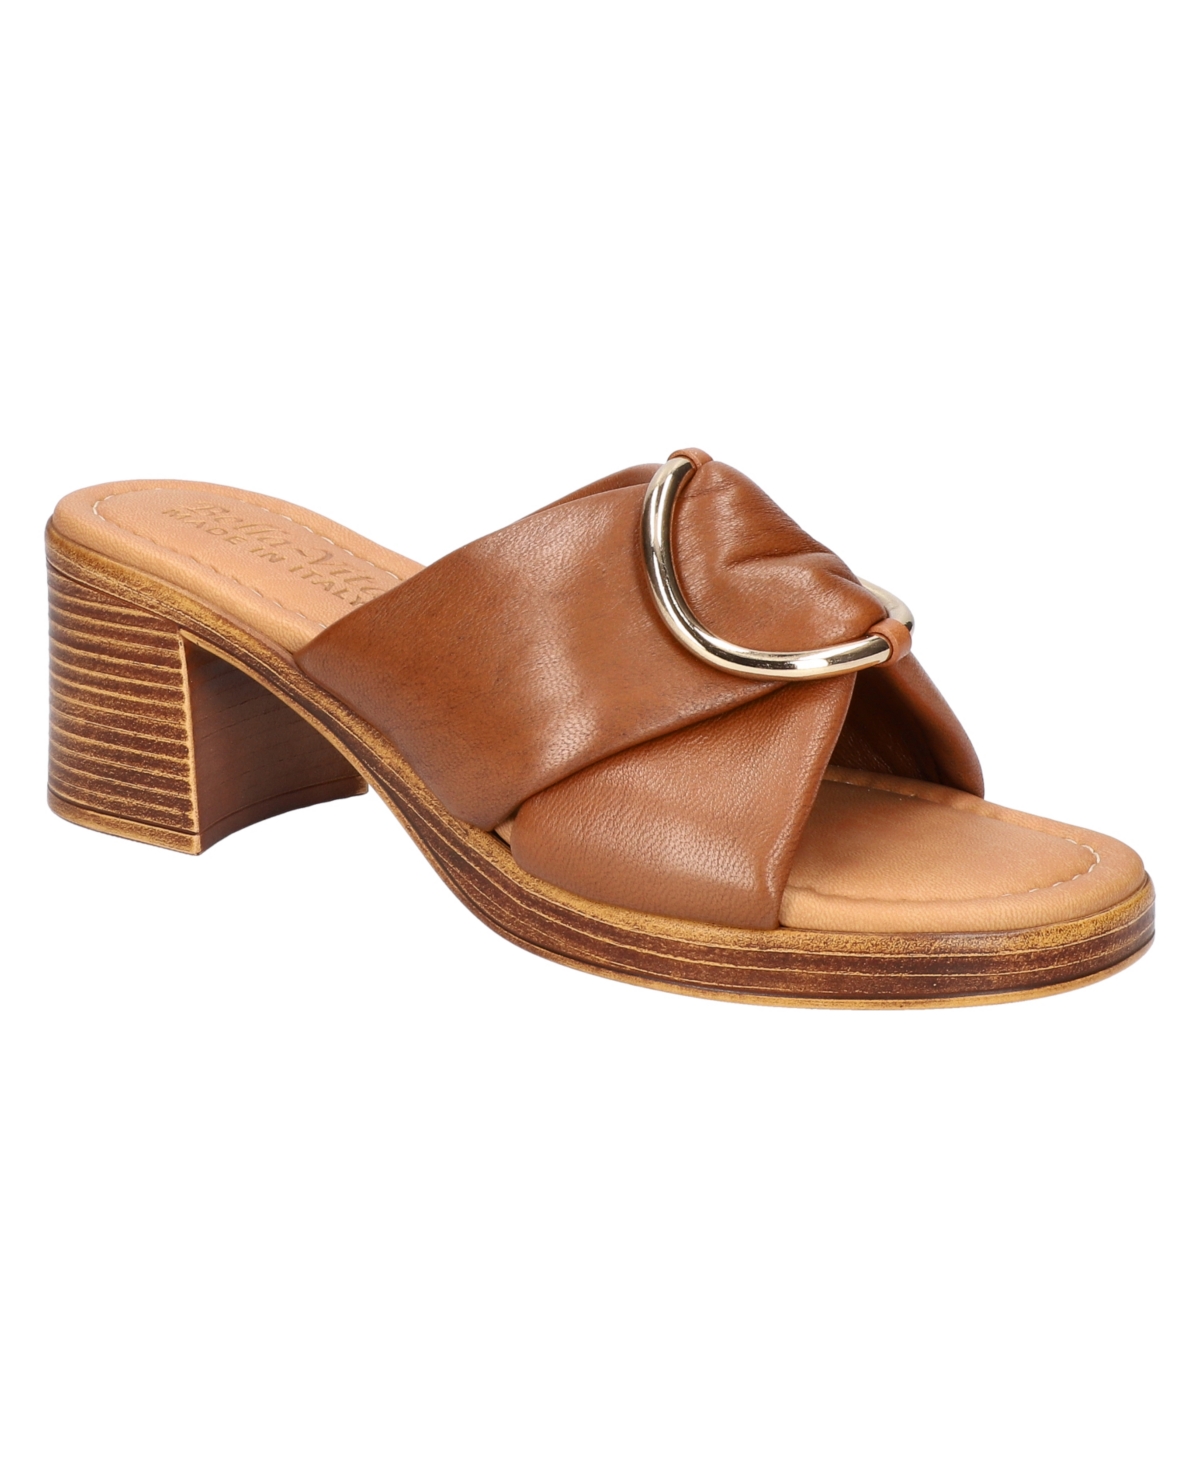 Women's Chi-Italy Block Heel Sandals - Whiskey Leather